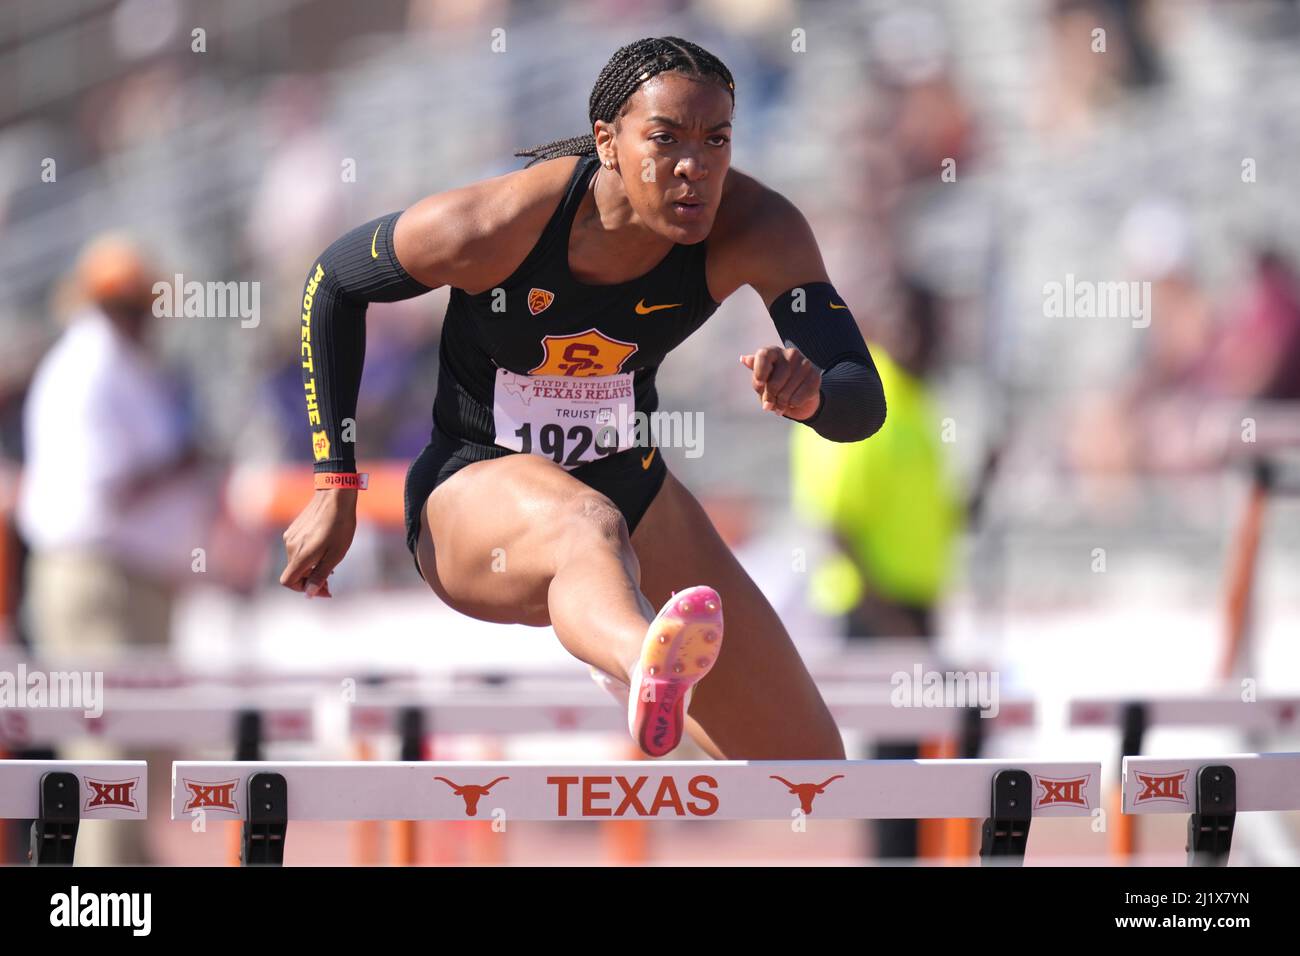 Jasmine Jones of Southern California places second in women's 100m